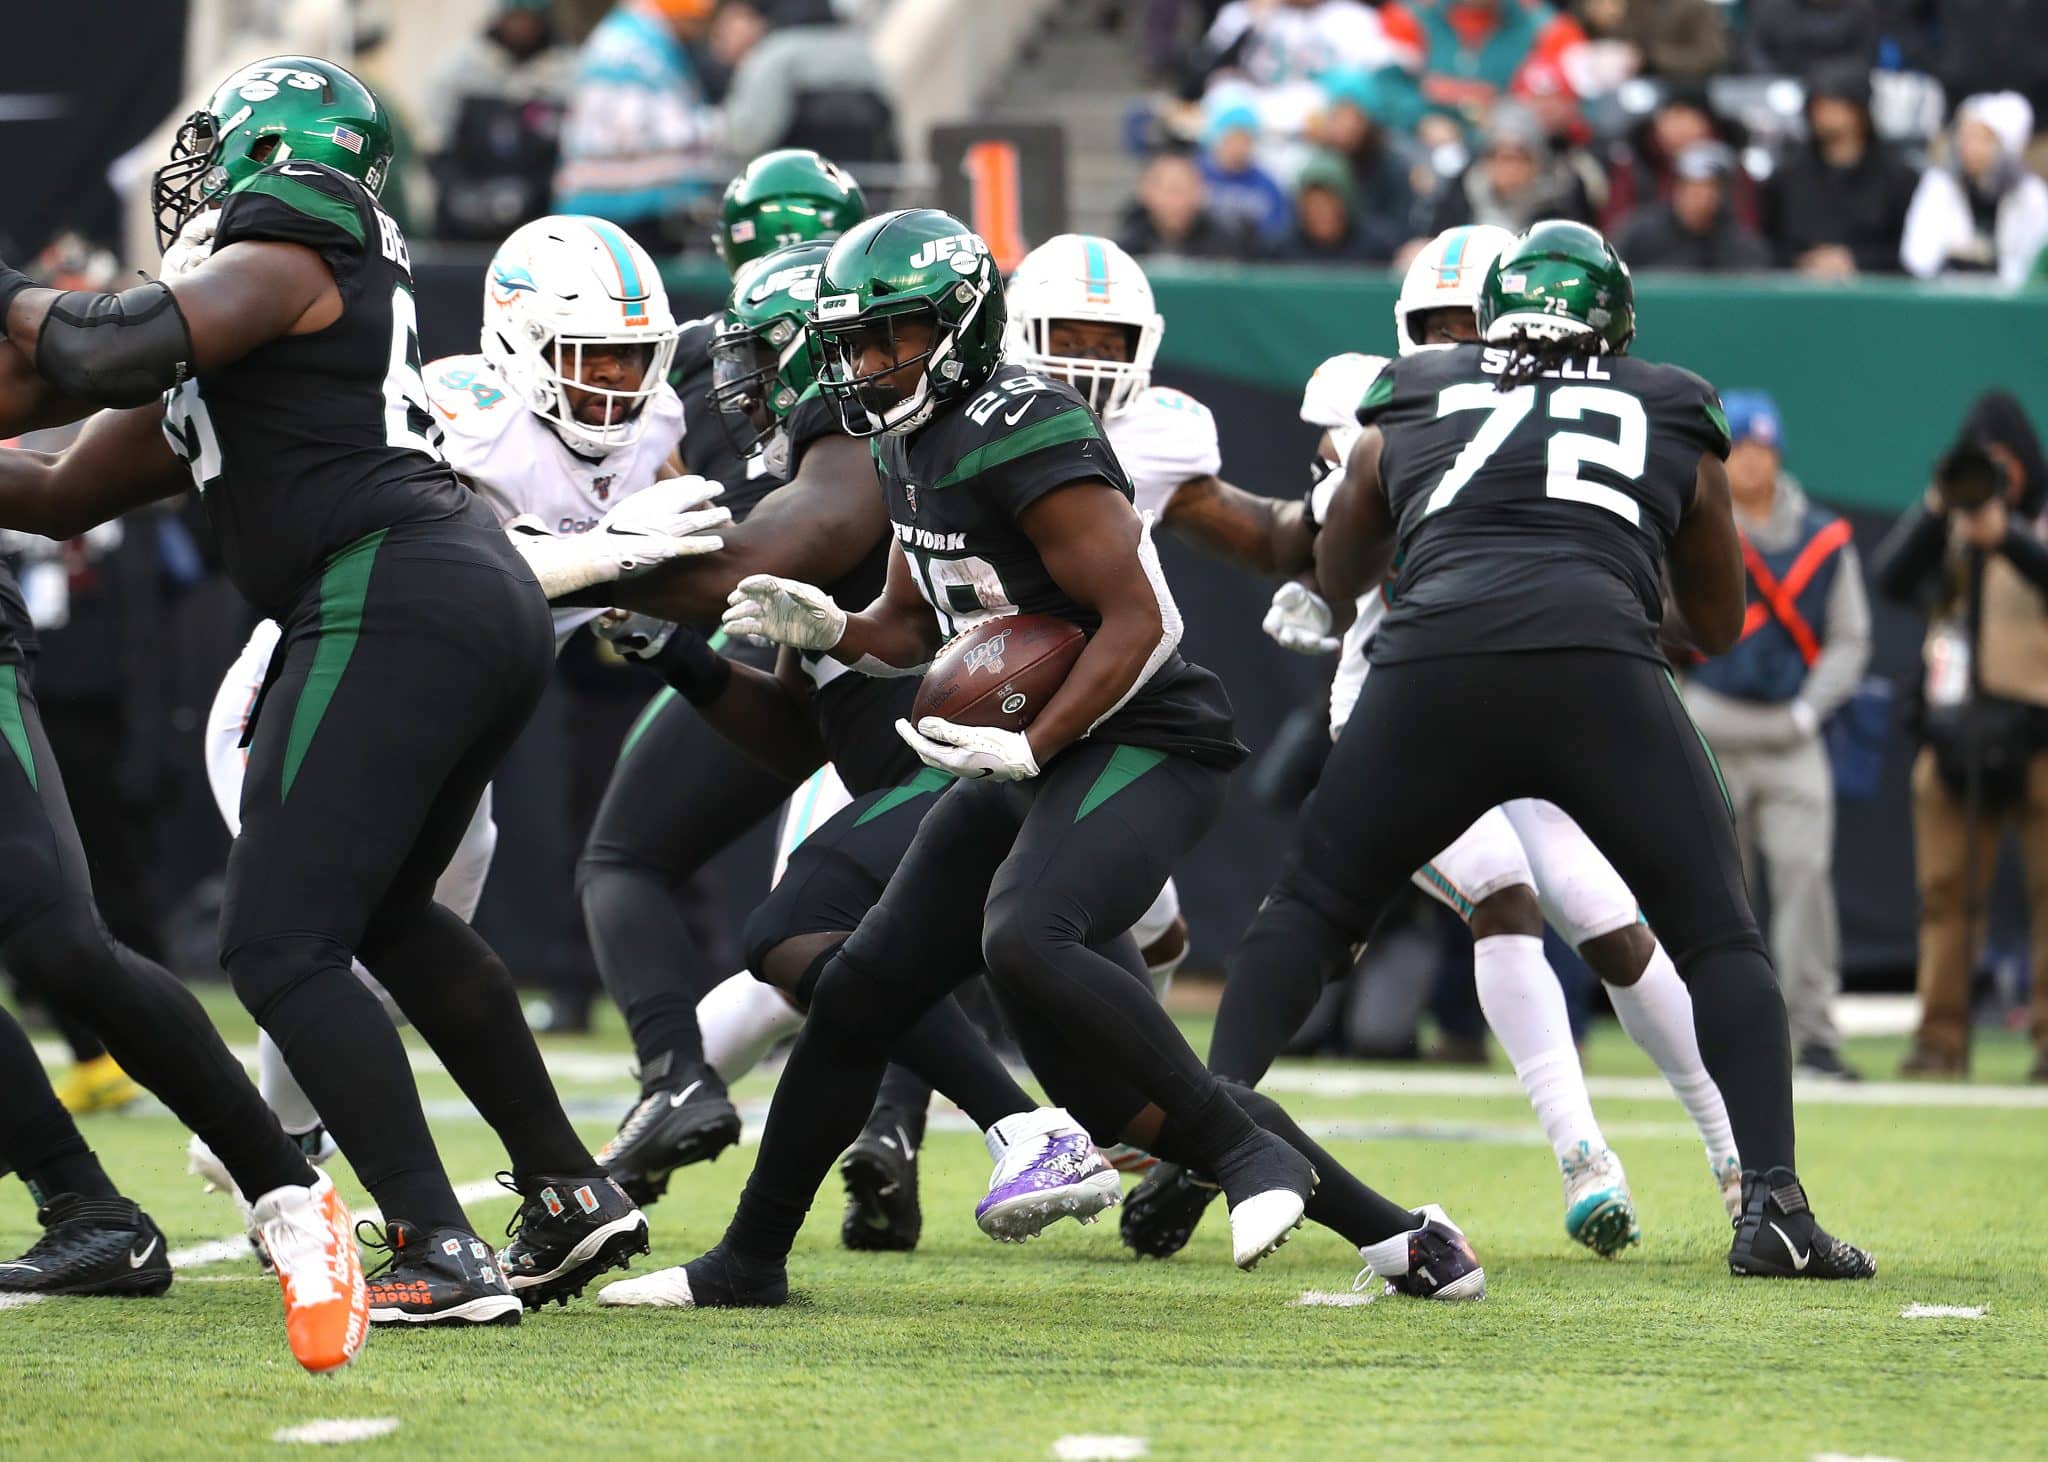 EAST RUTHERFORD, NEW JERSEY - DECEMBER 08: Bilal Powell #29 of the New York Jets runs against the Miami dolphins during their game at MetLife Stadium on December 08, 2019 in East Rutherford, New Jersey.